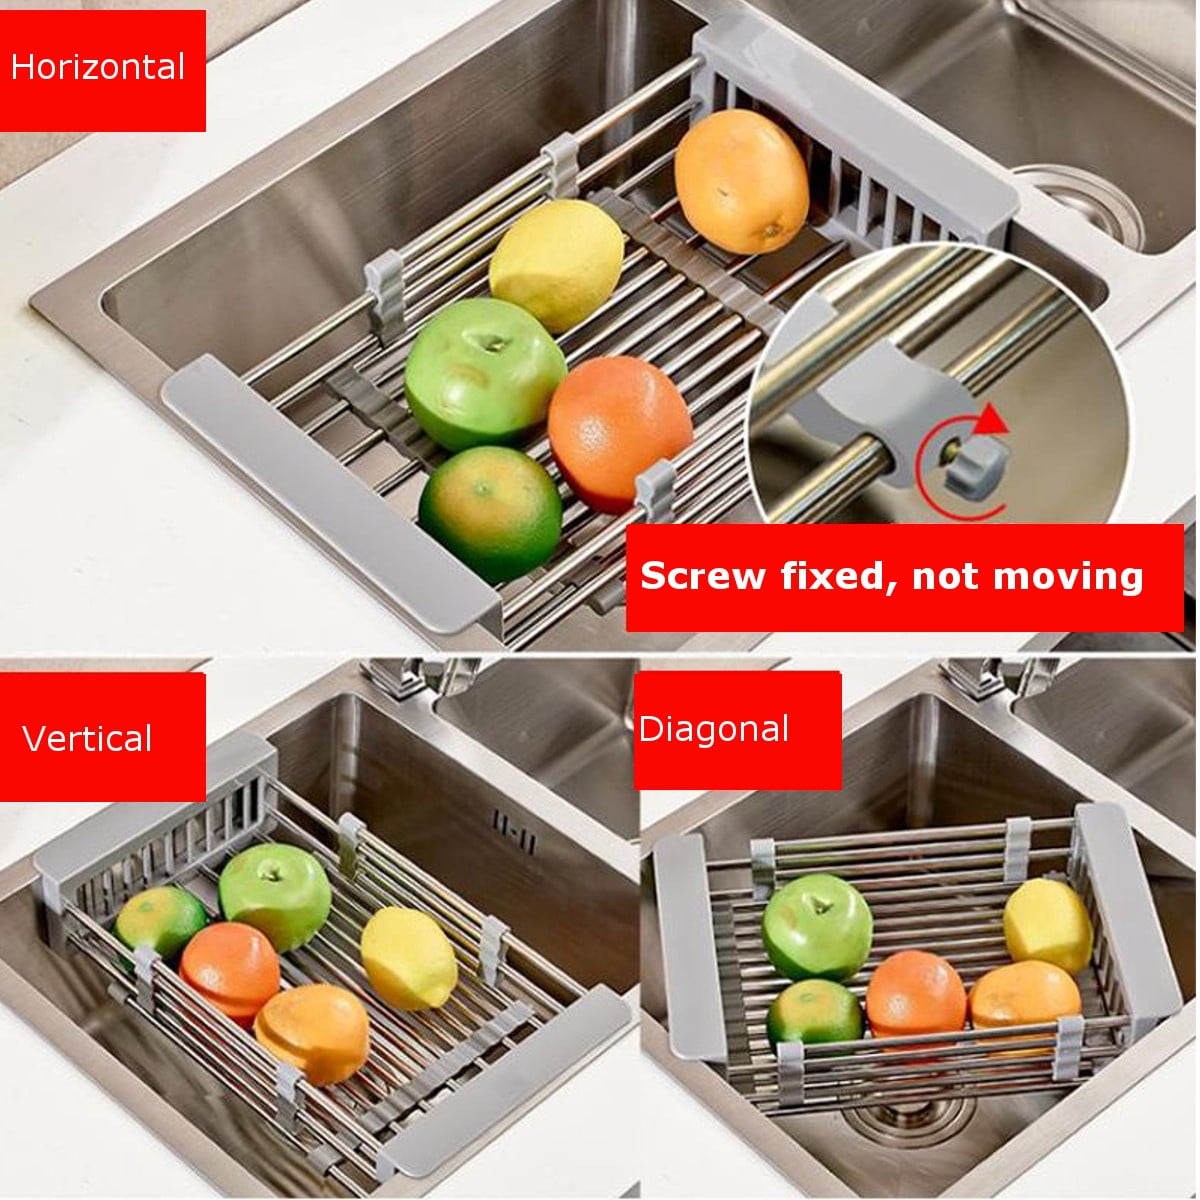 VEVOR Dish Drying Rack Expandable (11.6 in.-18.5 in.) Stainless